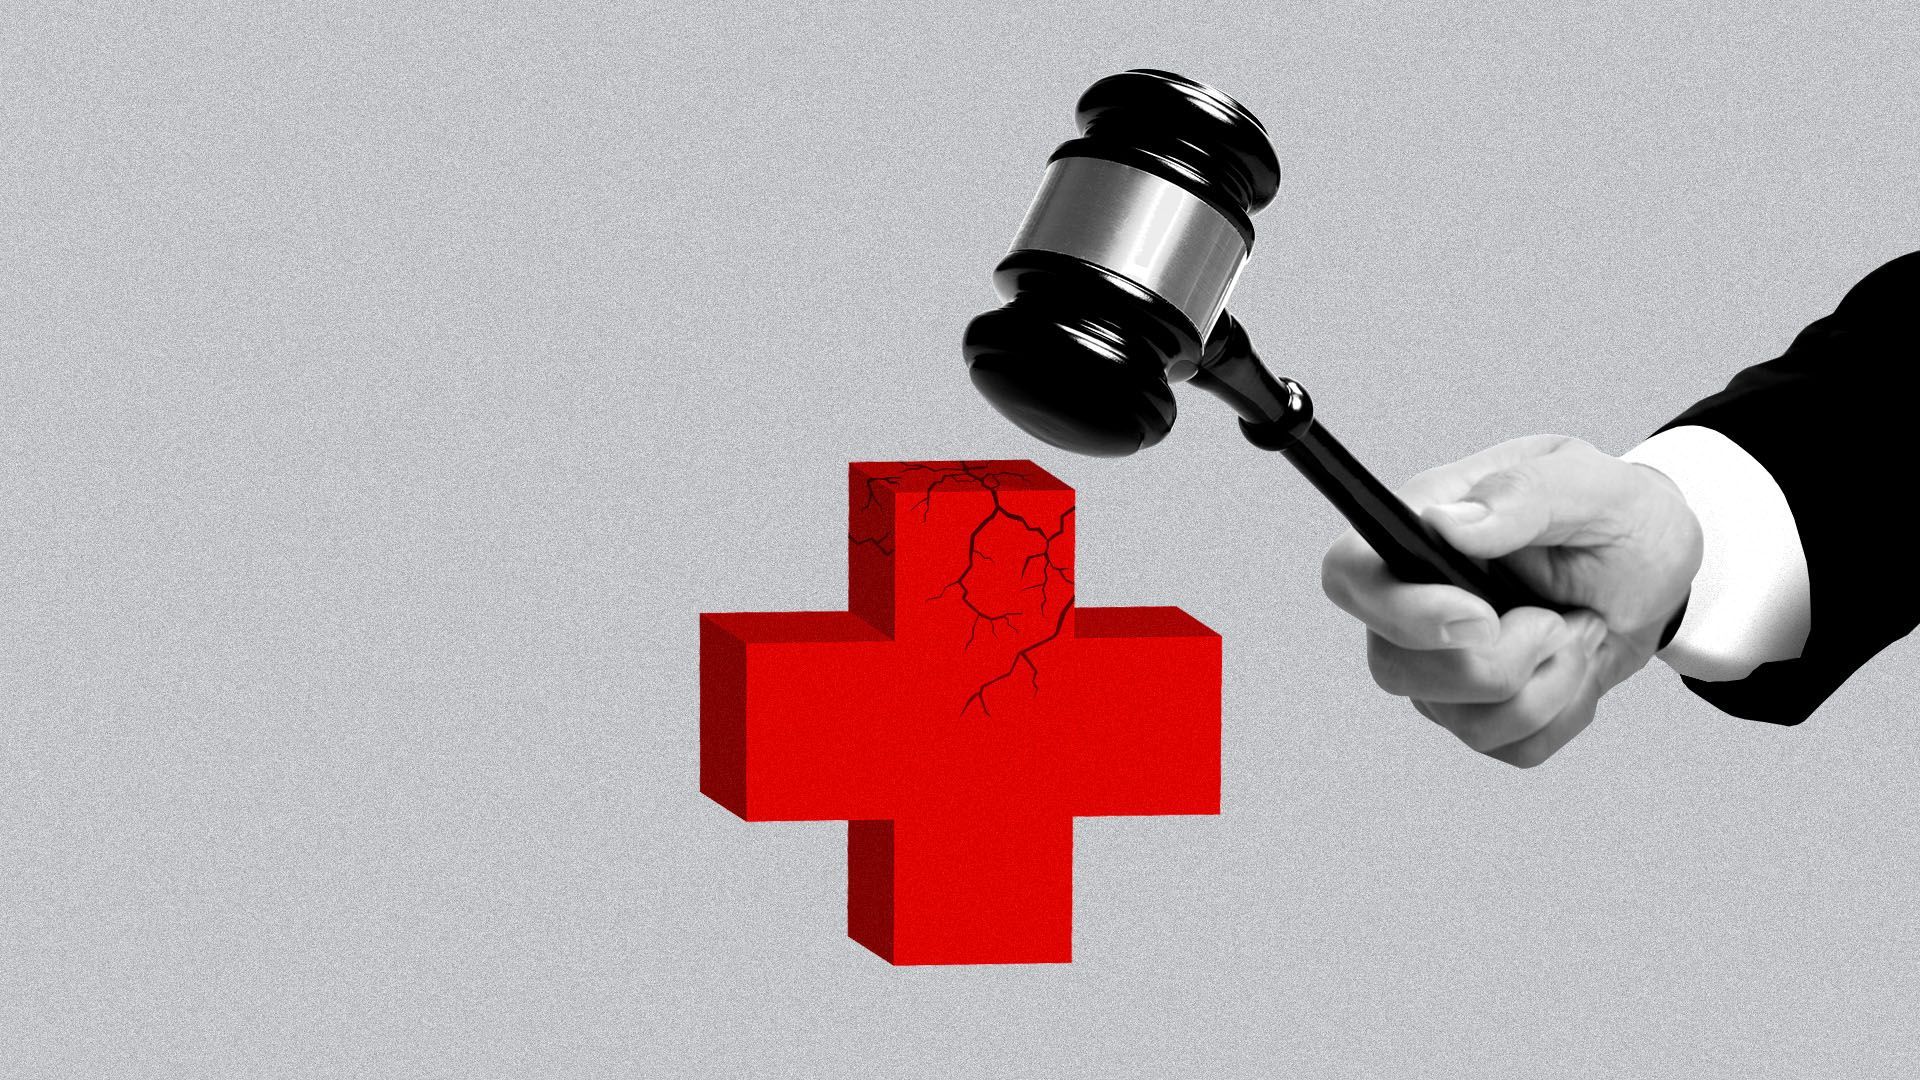 Illustration of hand with gavel breaking a red cross symbol.